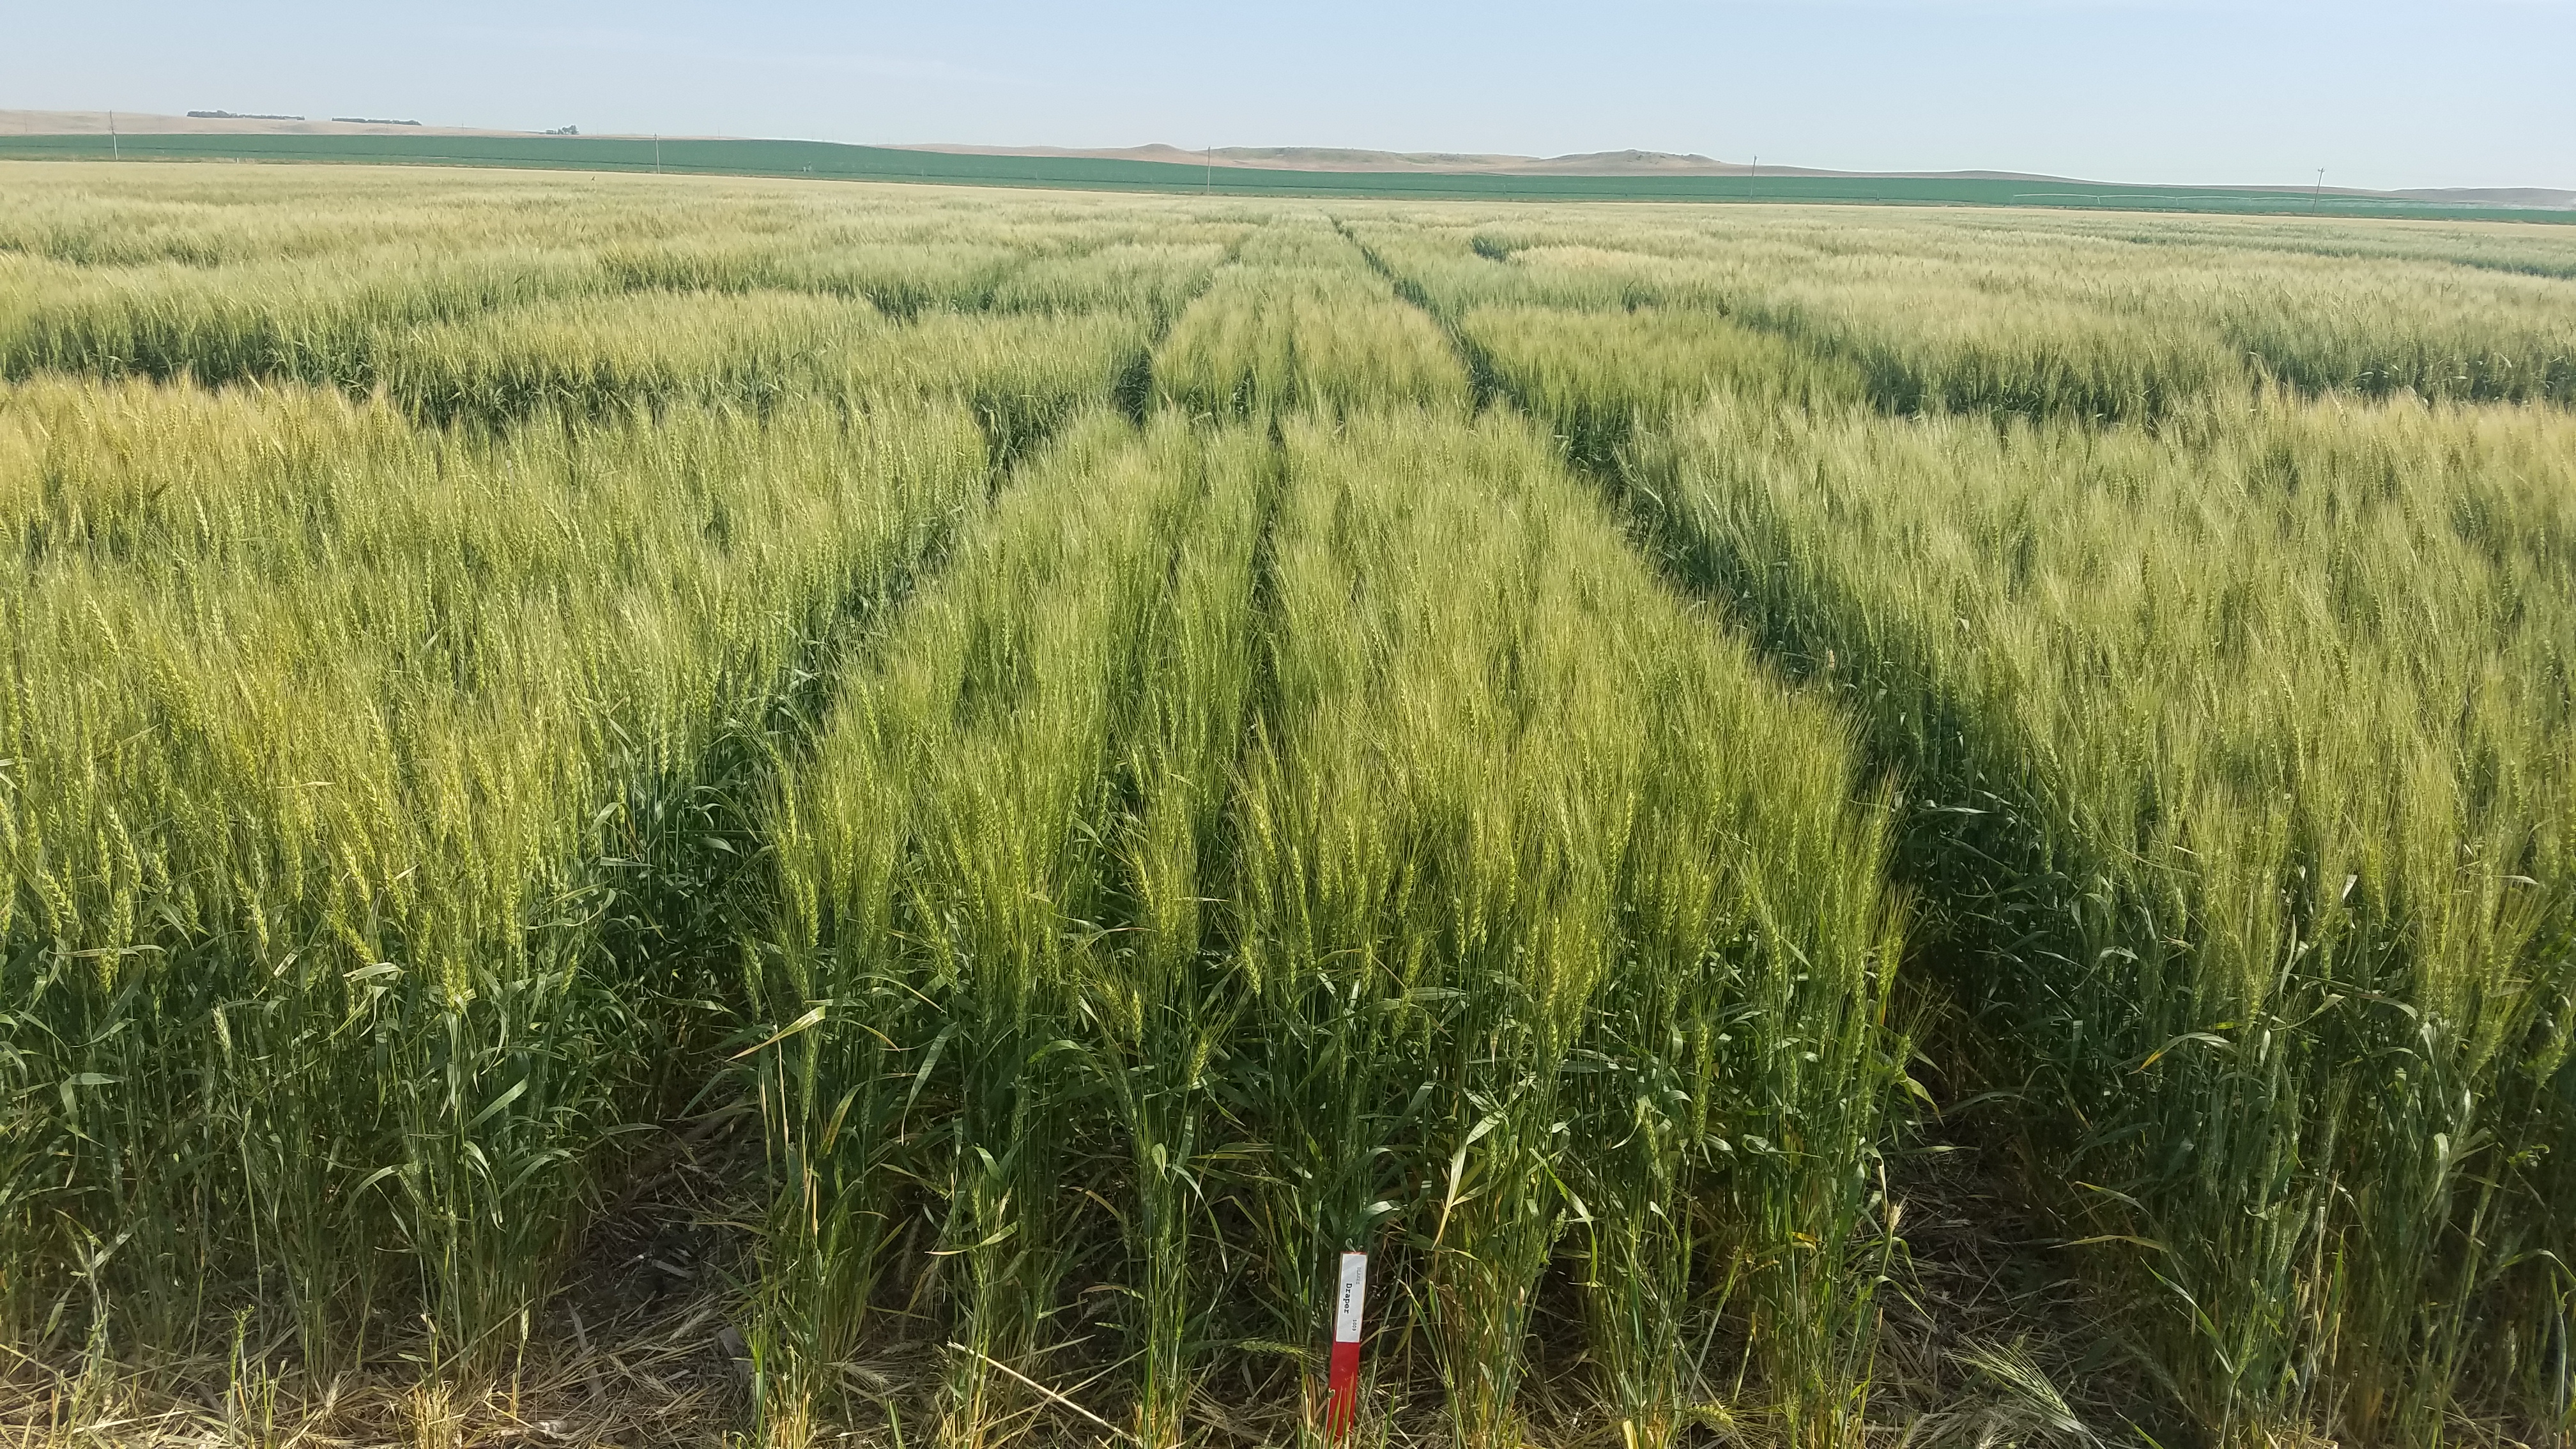 Winter wheat test plots with numerous groups of green wheat plants growing throughout.